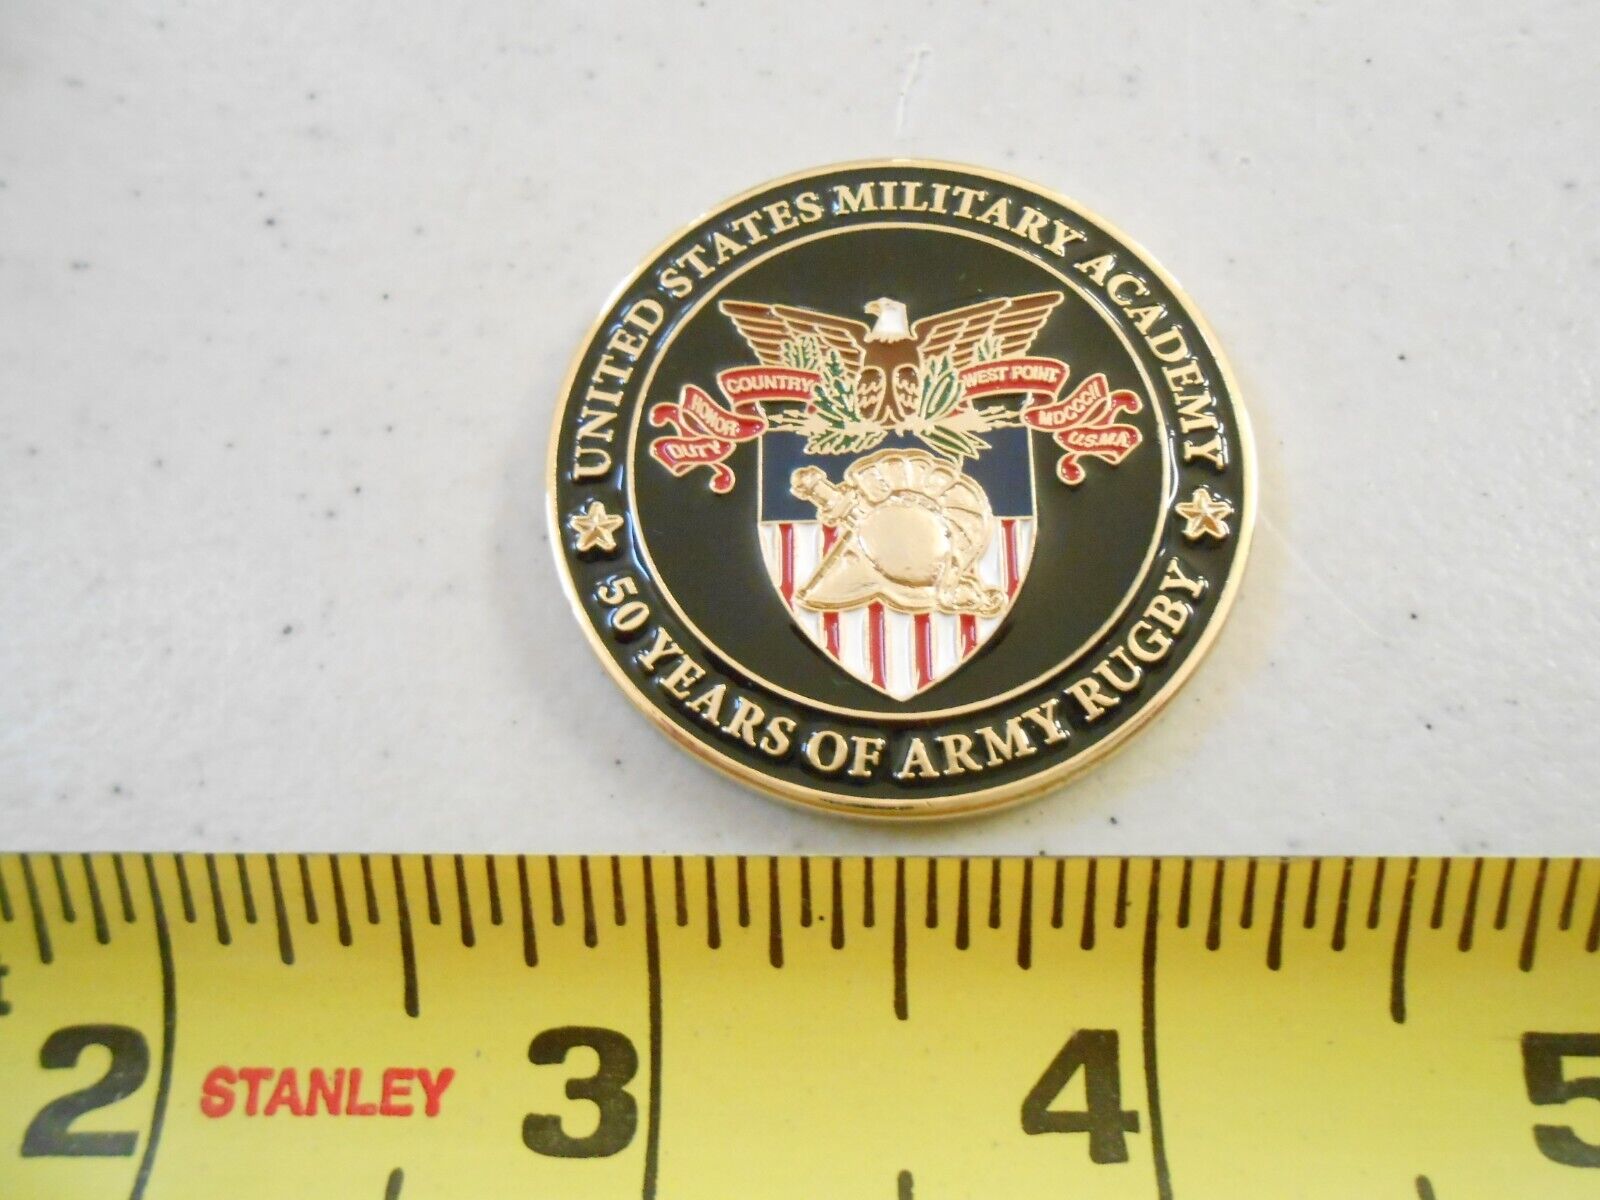 RARE US MILITARY ACADEMY WESTPOINT 50 YEARS ARMY RUGBY MILITARY CHALLENGE COIN